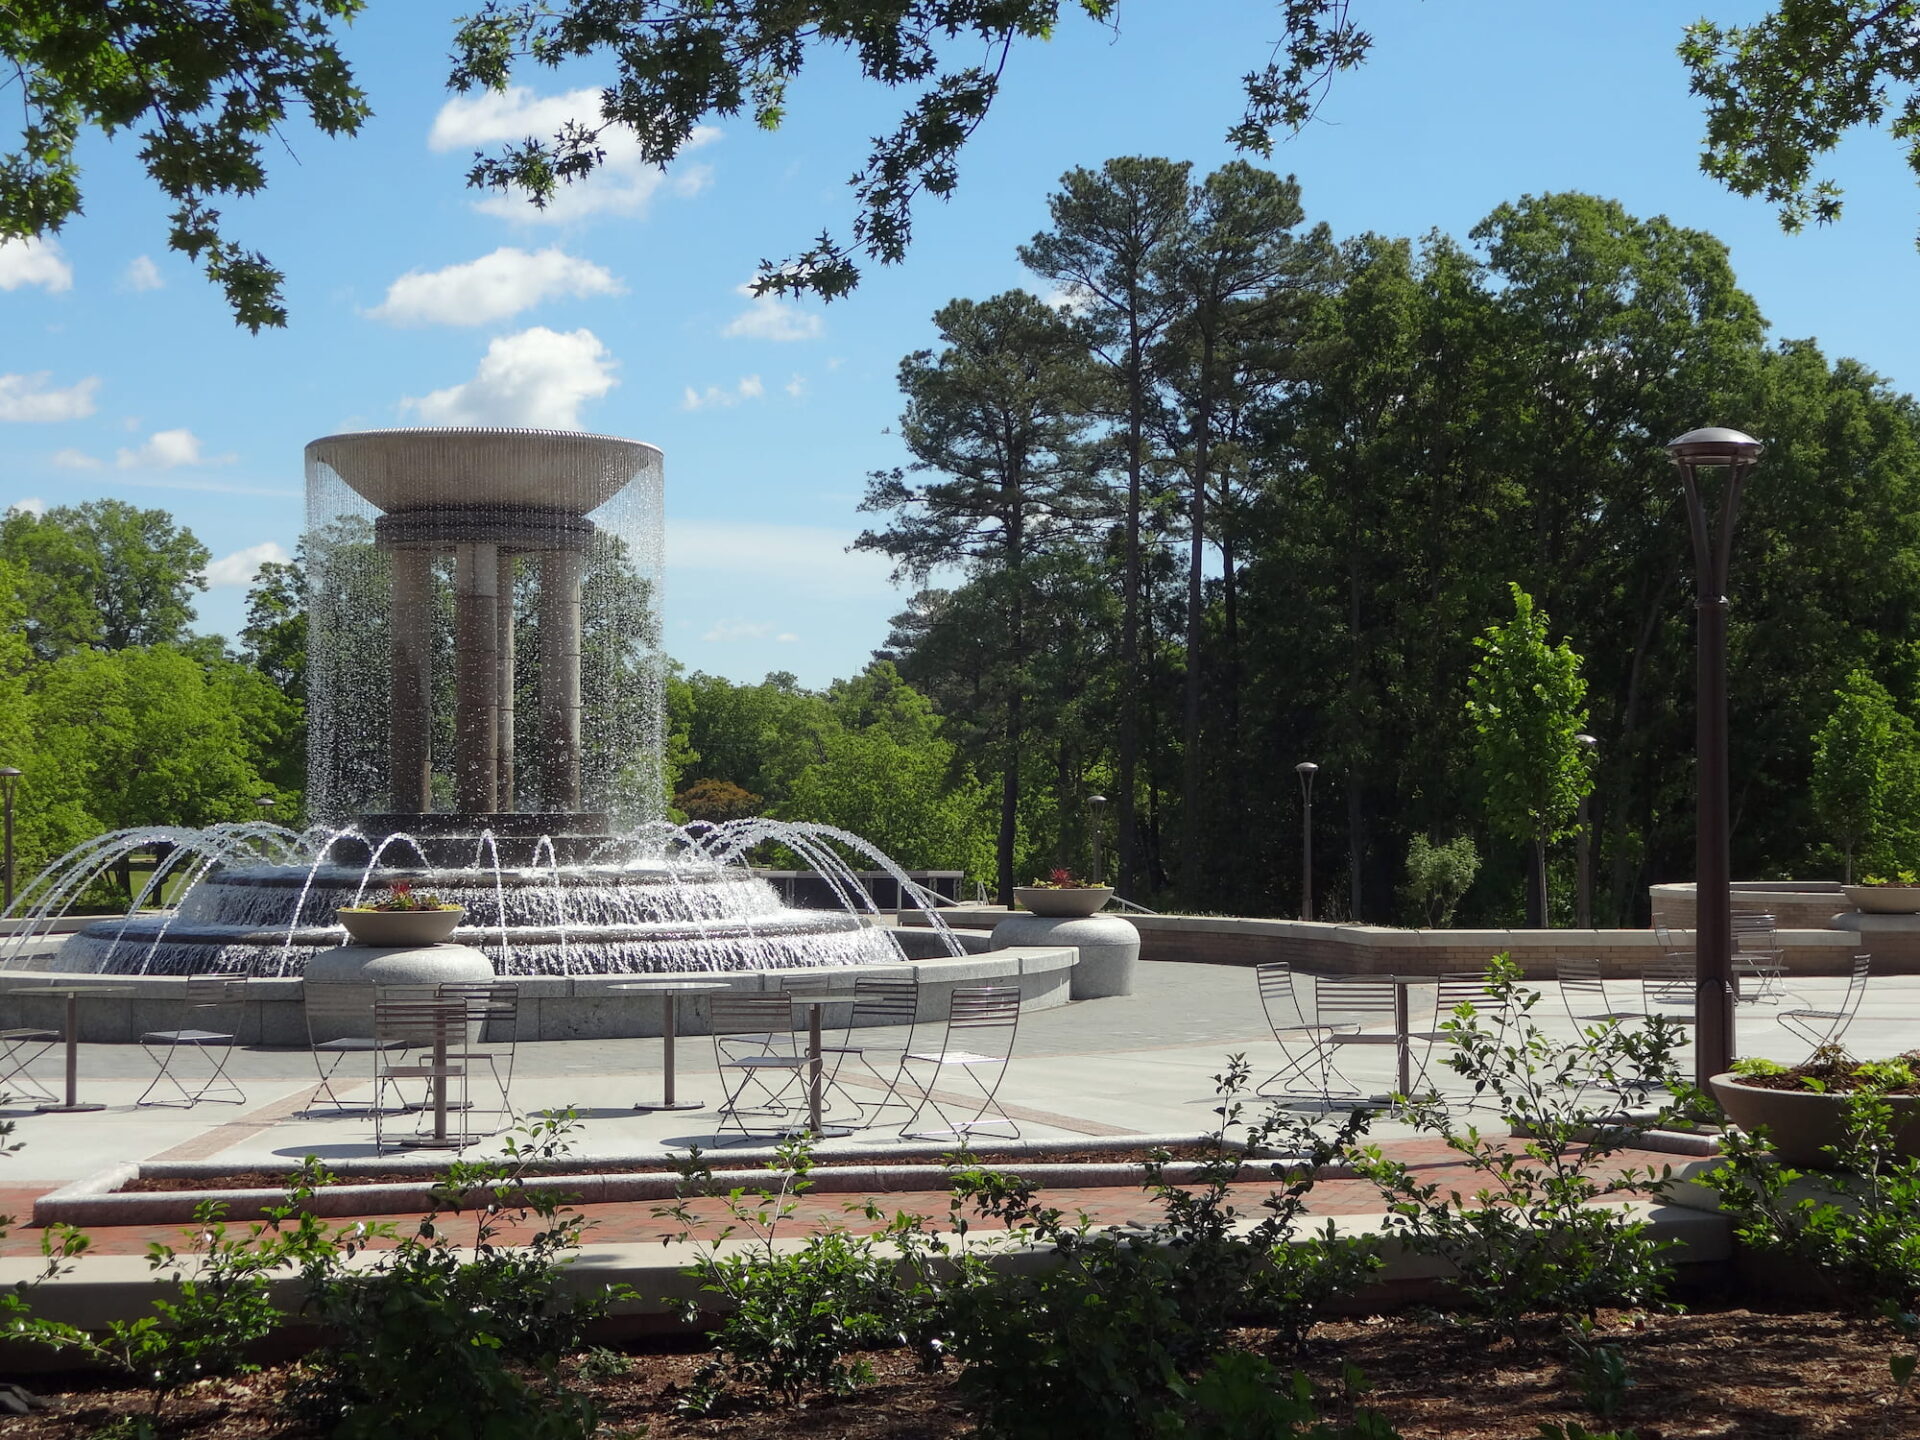 Landscaping in Cary, NC, image of a Running Water Fountain in a downtown park in Cary, NC